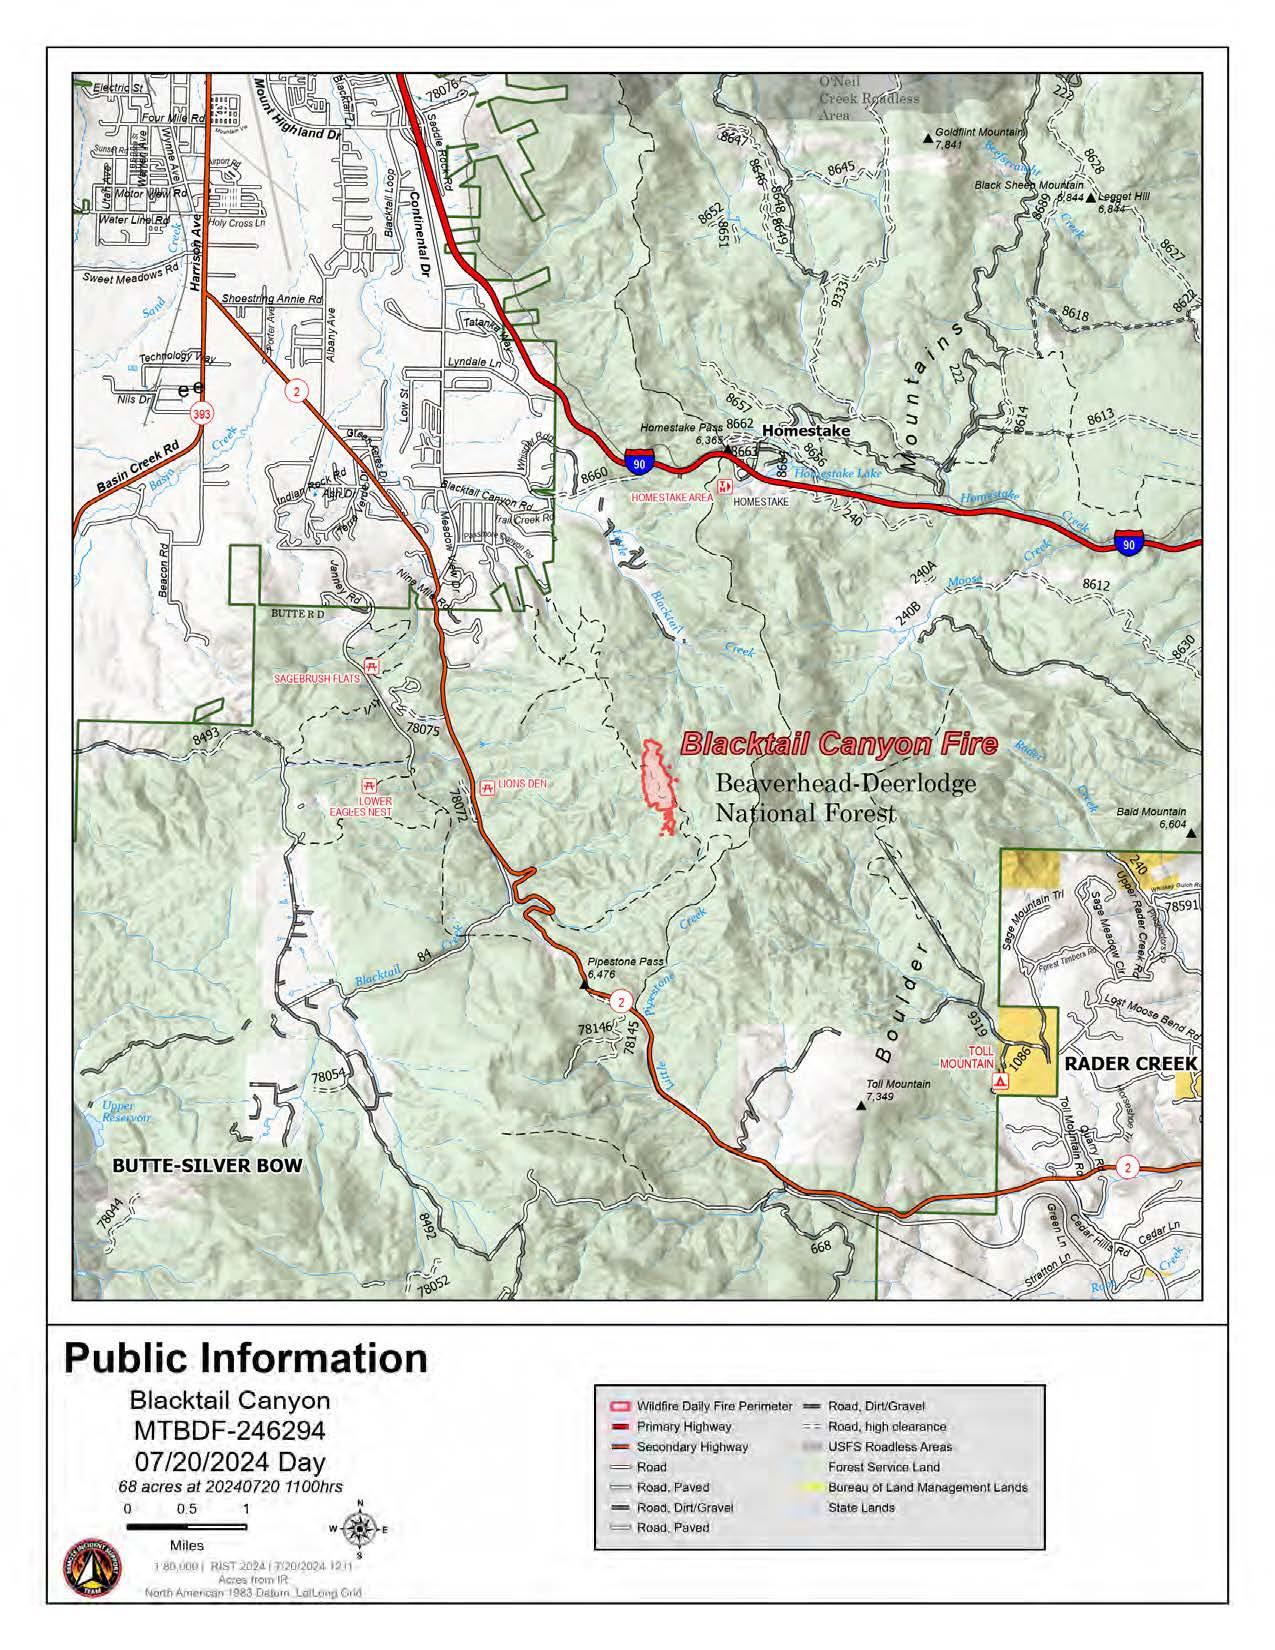 Map of Blacktail Fire location in relation to Butte, MT on the Beaverhead-Deerlodge NF